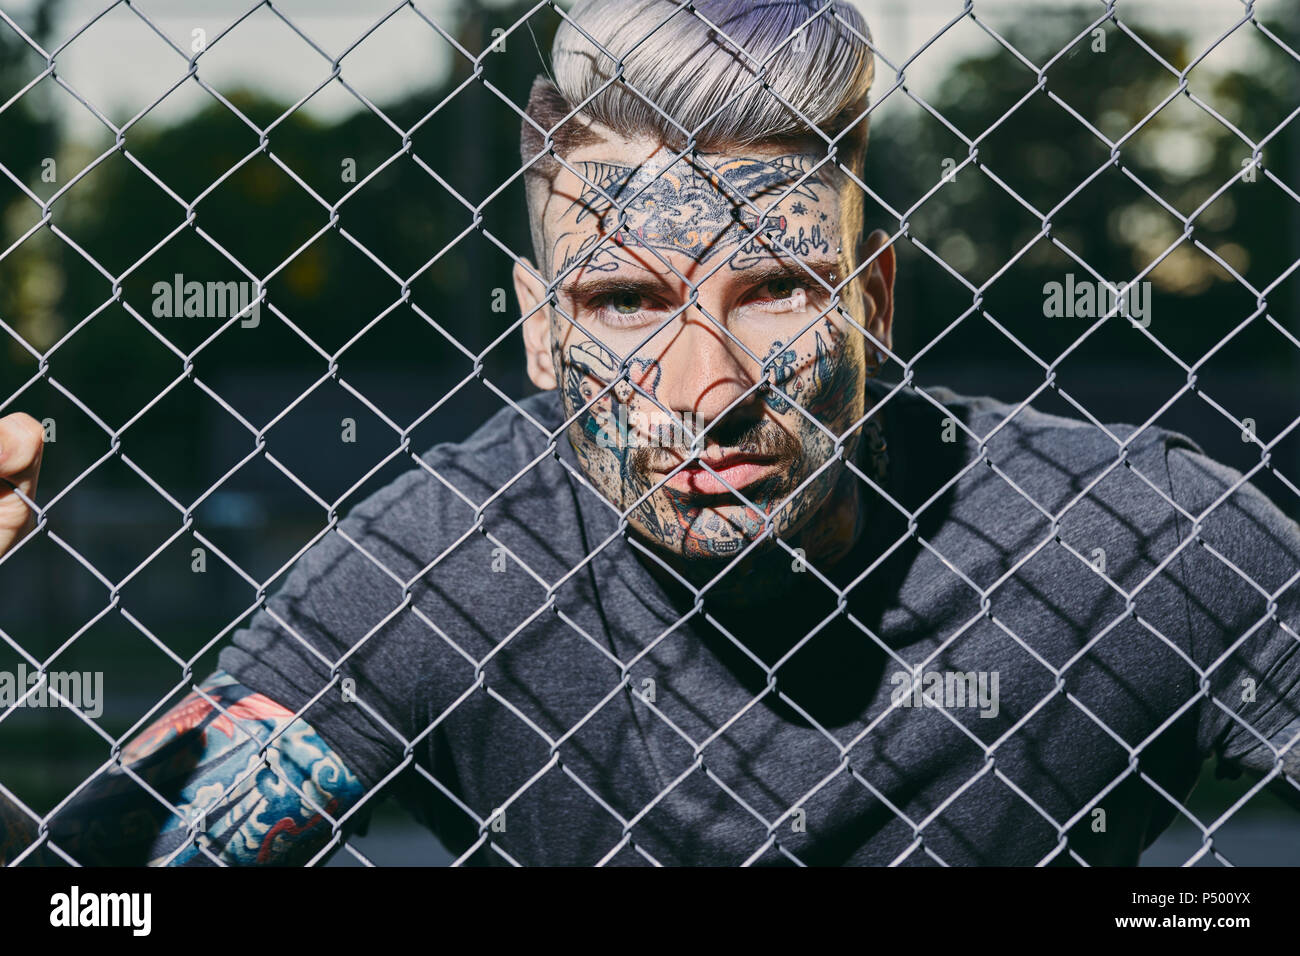 Portrait of tattooed young man behind fence Stock Photo